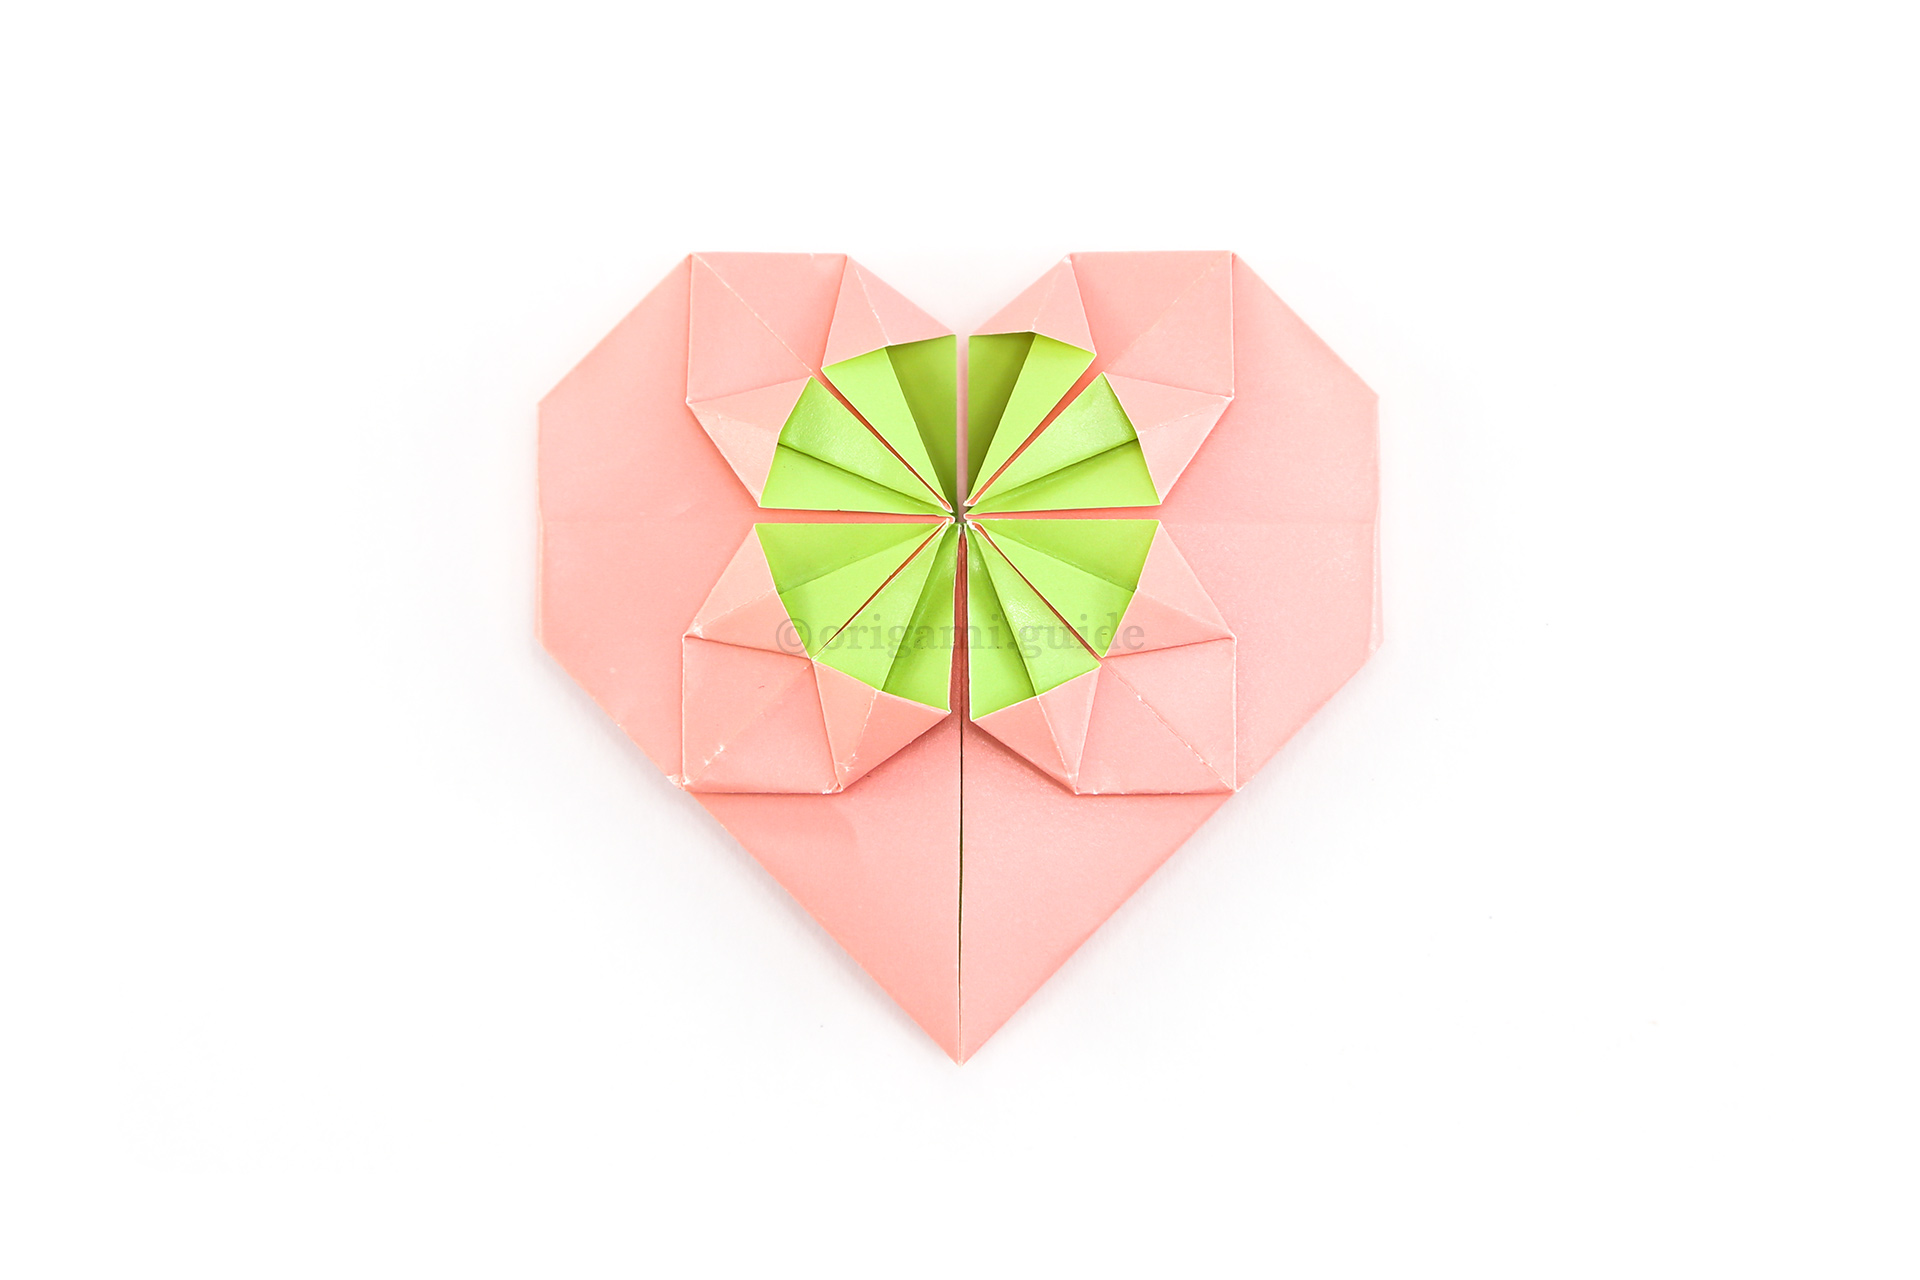 32. The fancy origami heart is complete! If you're adding coin to the middle circle, it will fit under the four "spikes" inside the circle.